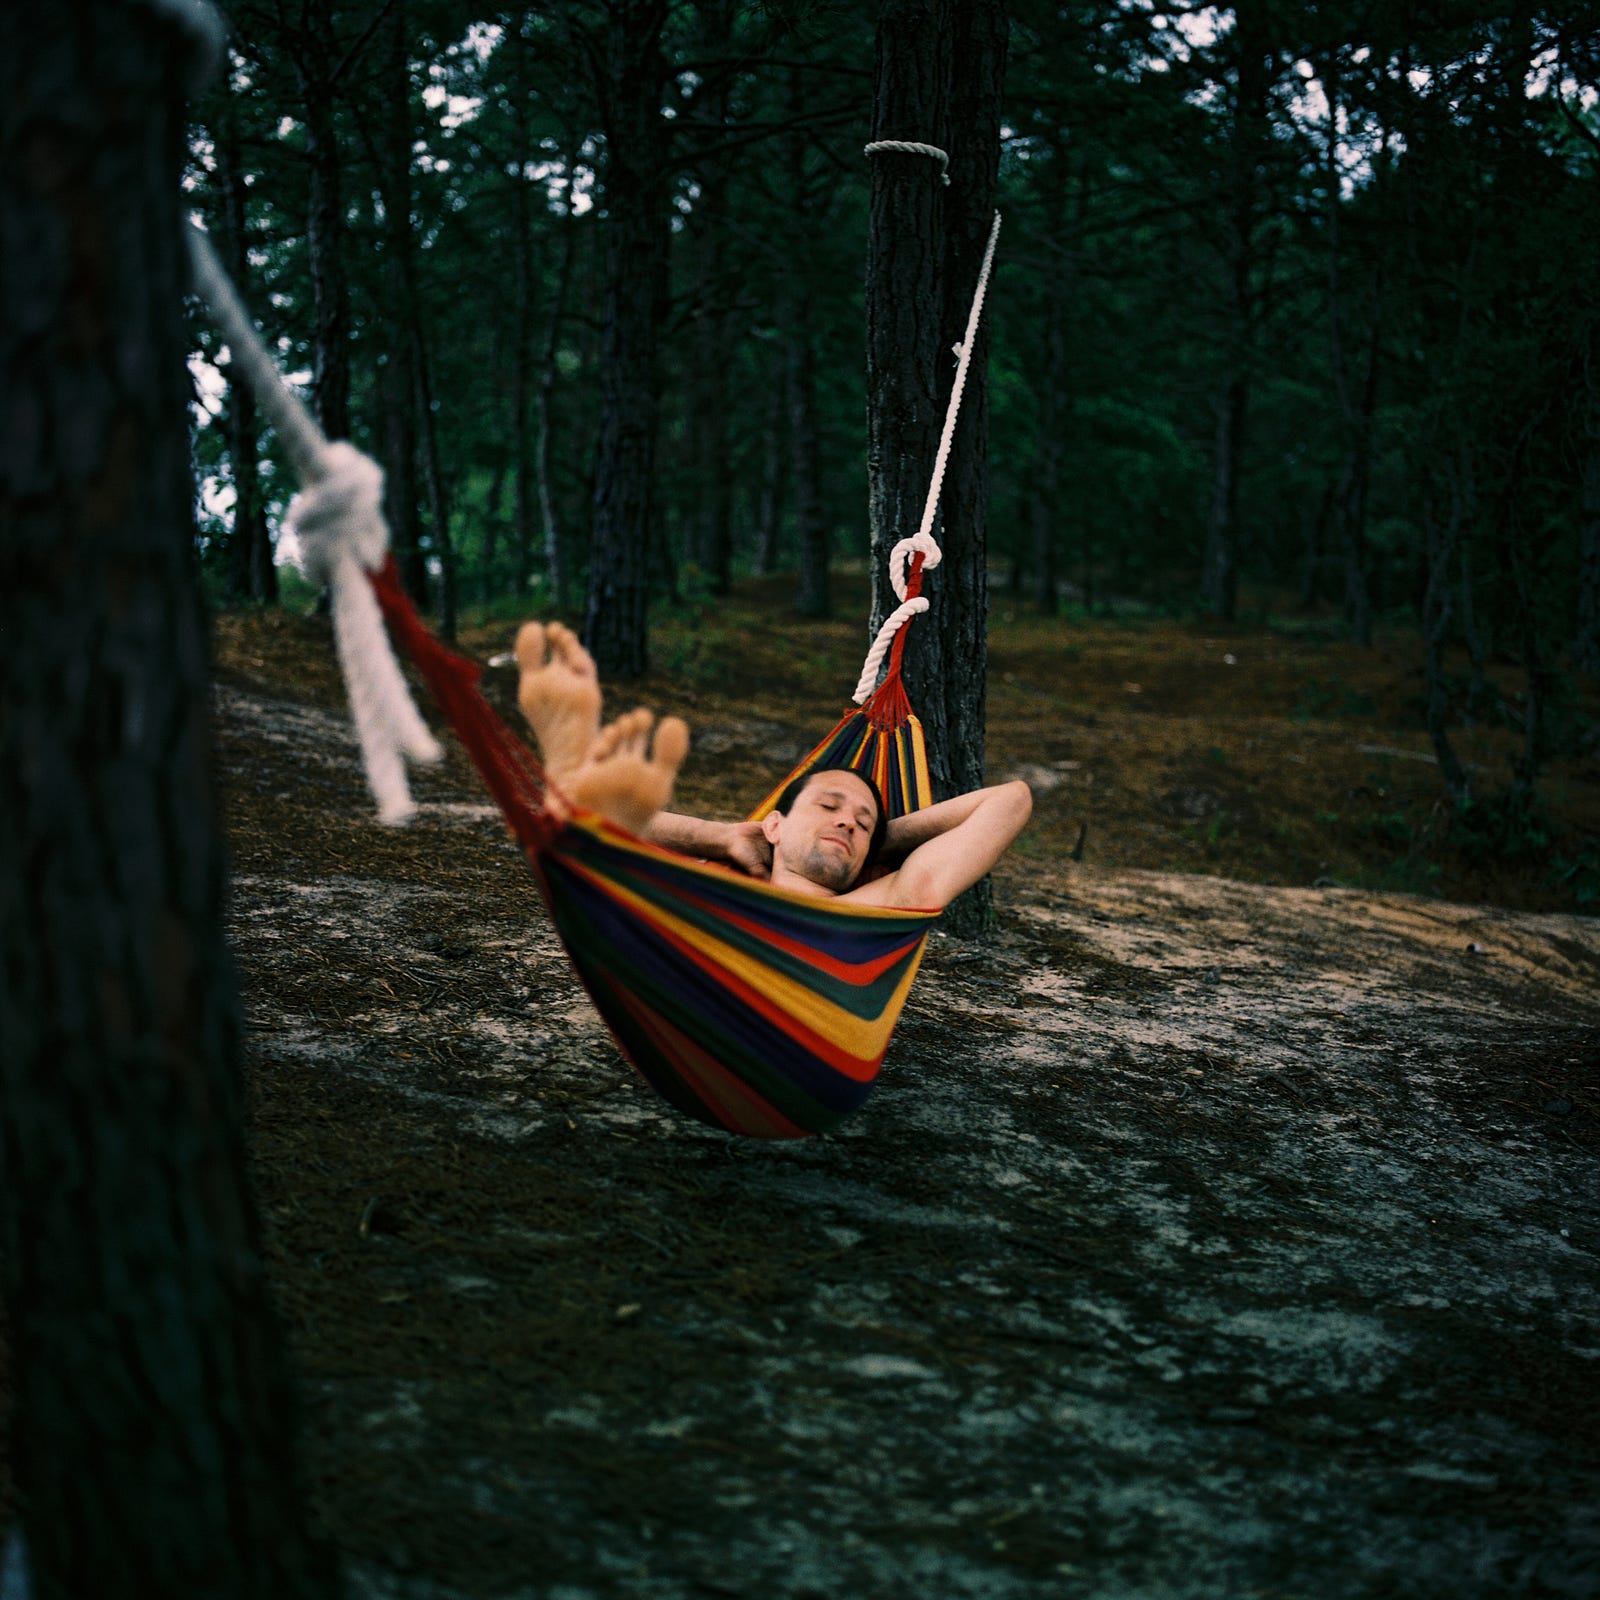 A young man sleeps in a hammock. Power naps help me improve: Alertness, concentration, focus, mood, and short-term memory.